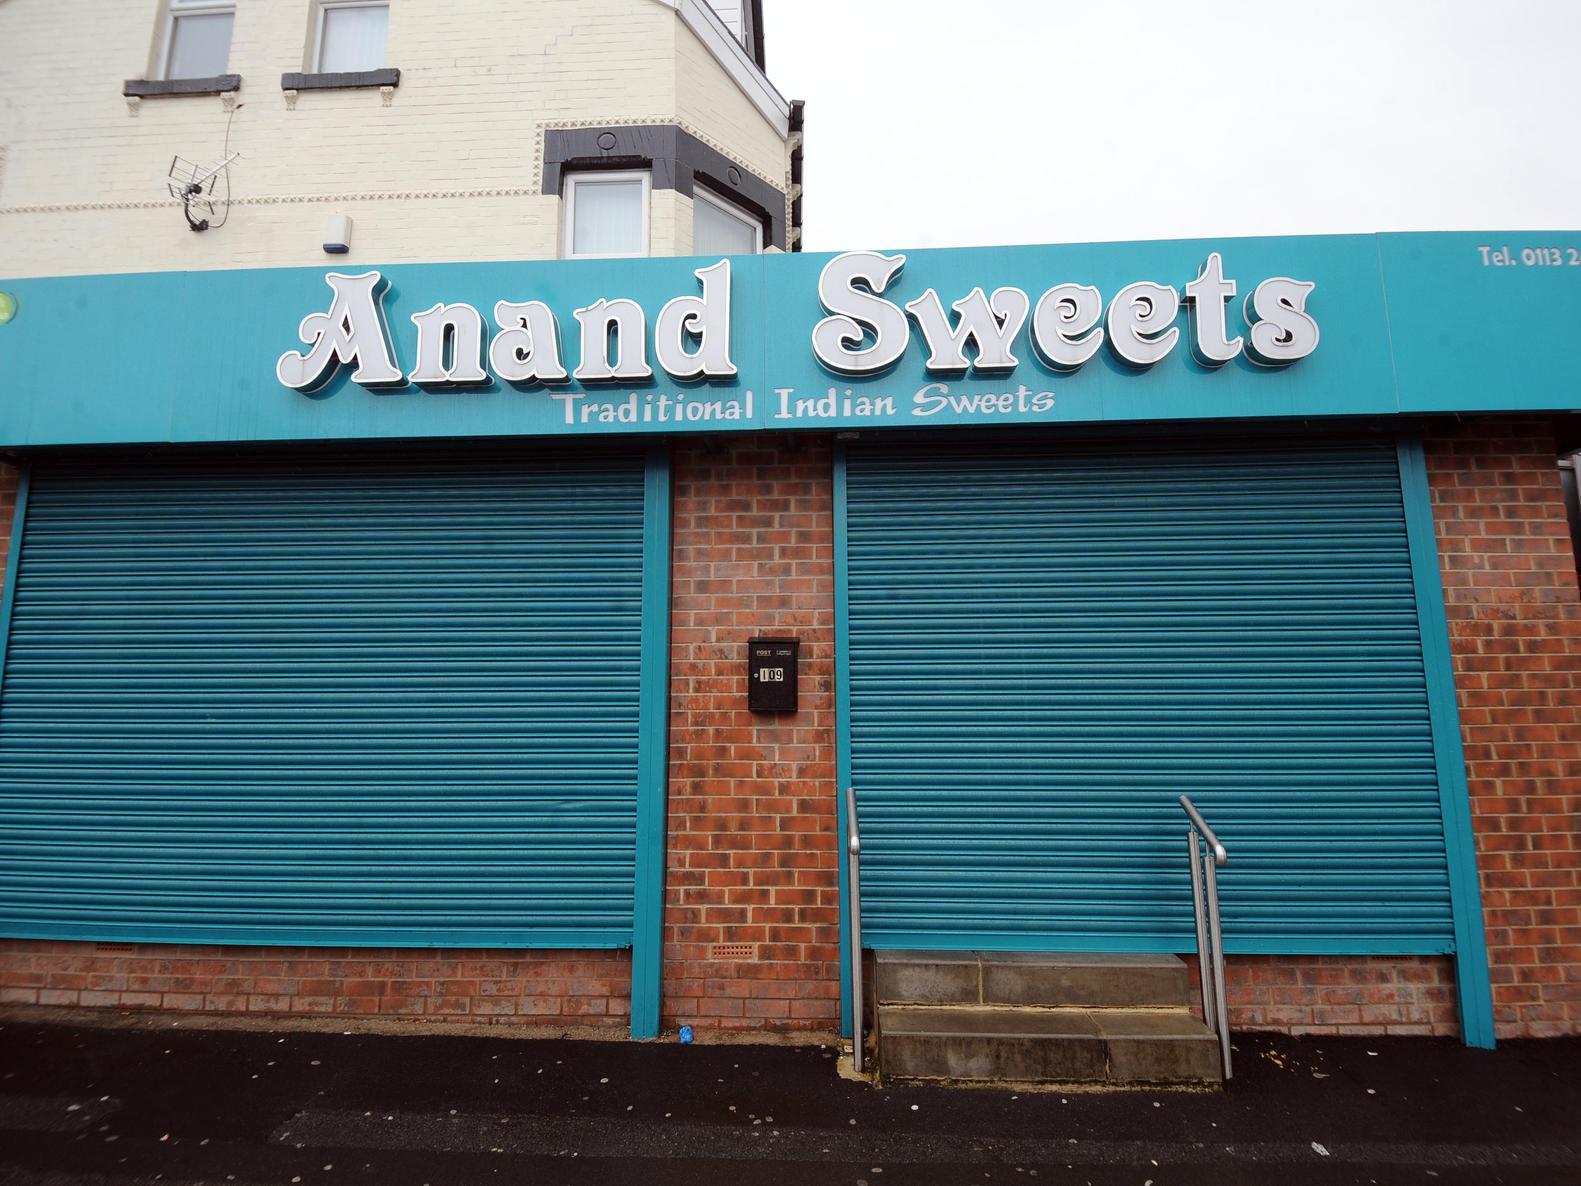 Located on Harehills Road. As well as tasty Indian breakfasts and lunch, traditional Indian sweets are on offer - for amazing prices.